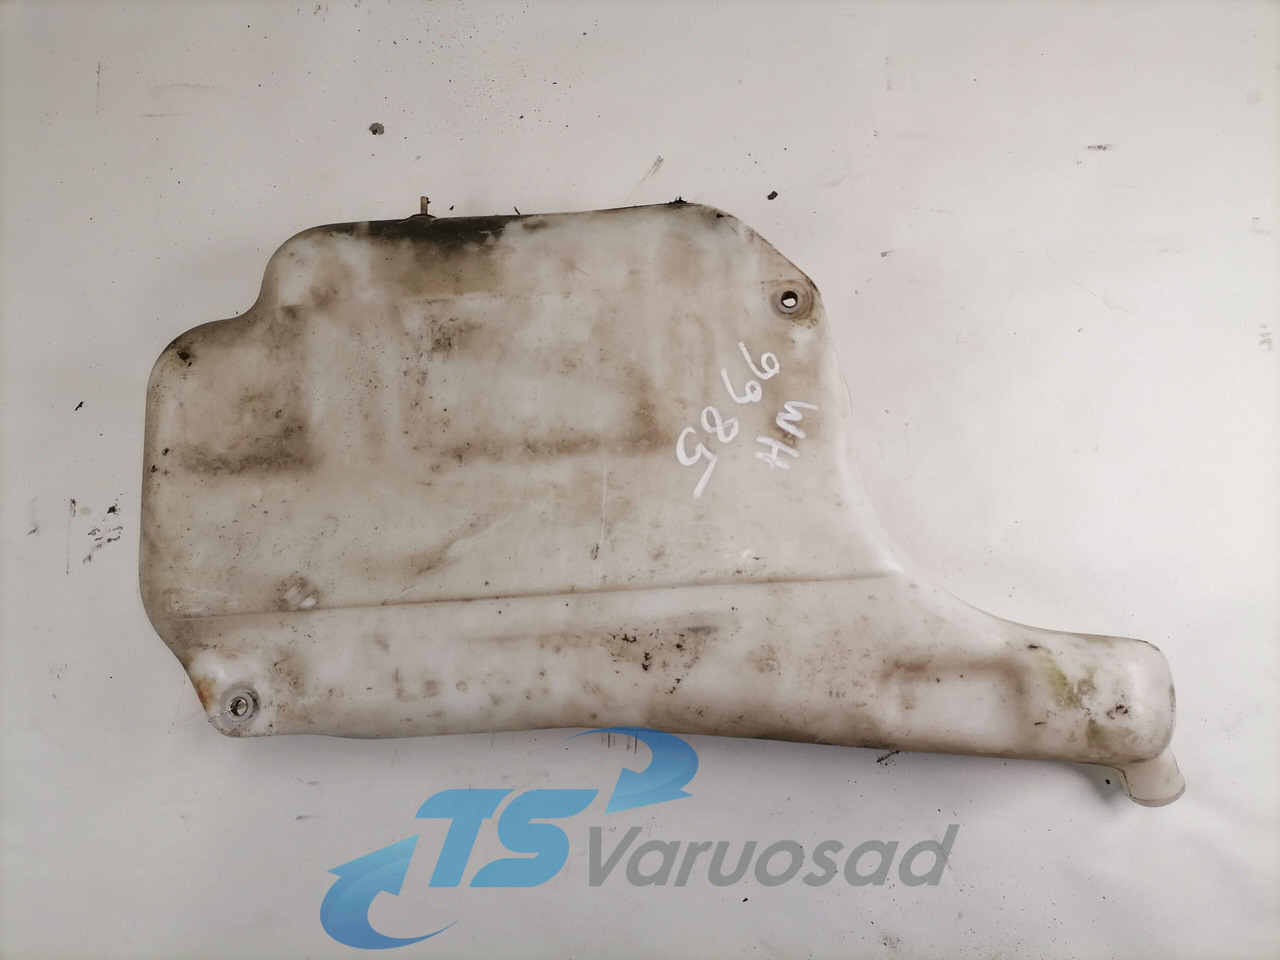 Essuie-glace pour Camion Volvo Windscreen washer fluid tank 3121310: photos 4